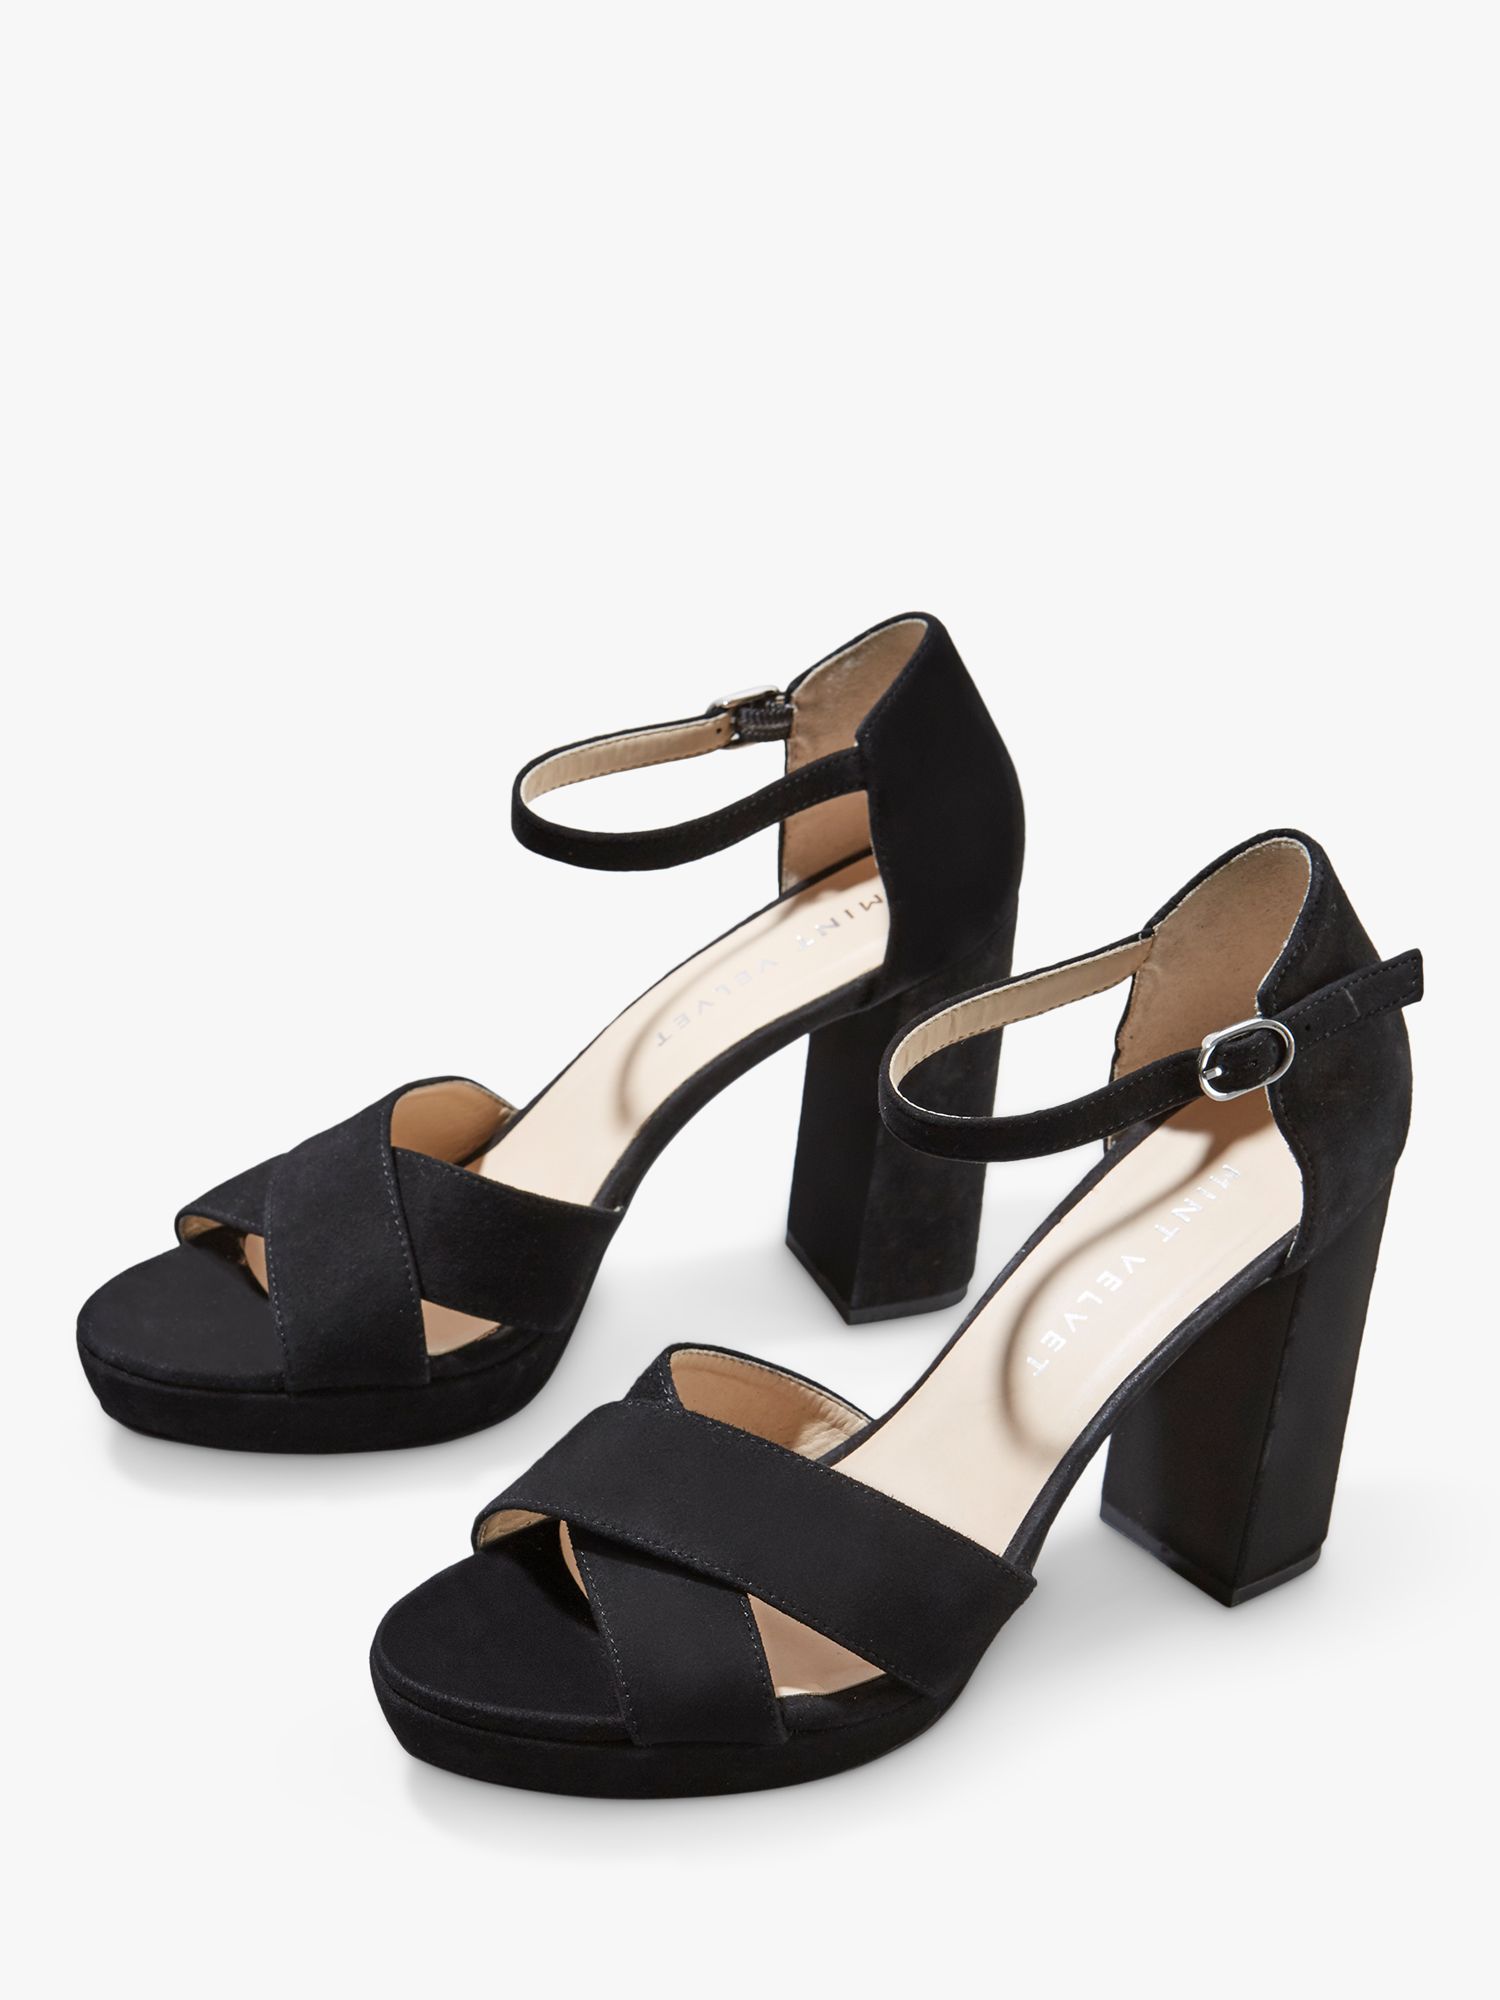 Mint Velvet Boo Suede Strappy Sandals, Black at John Lewis & Partners